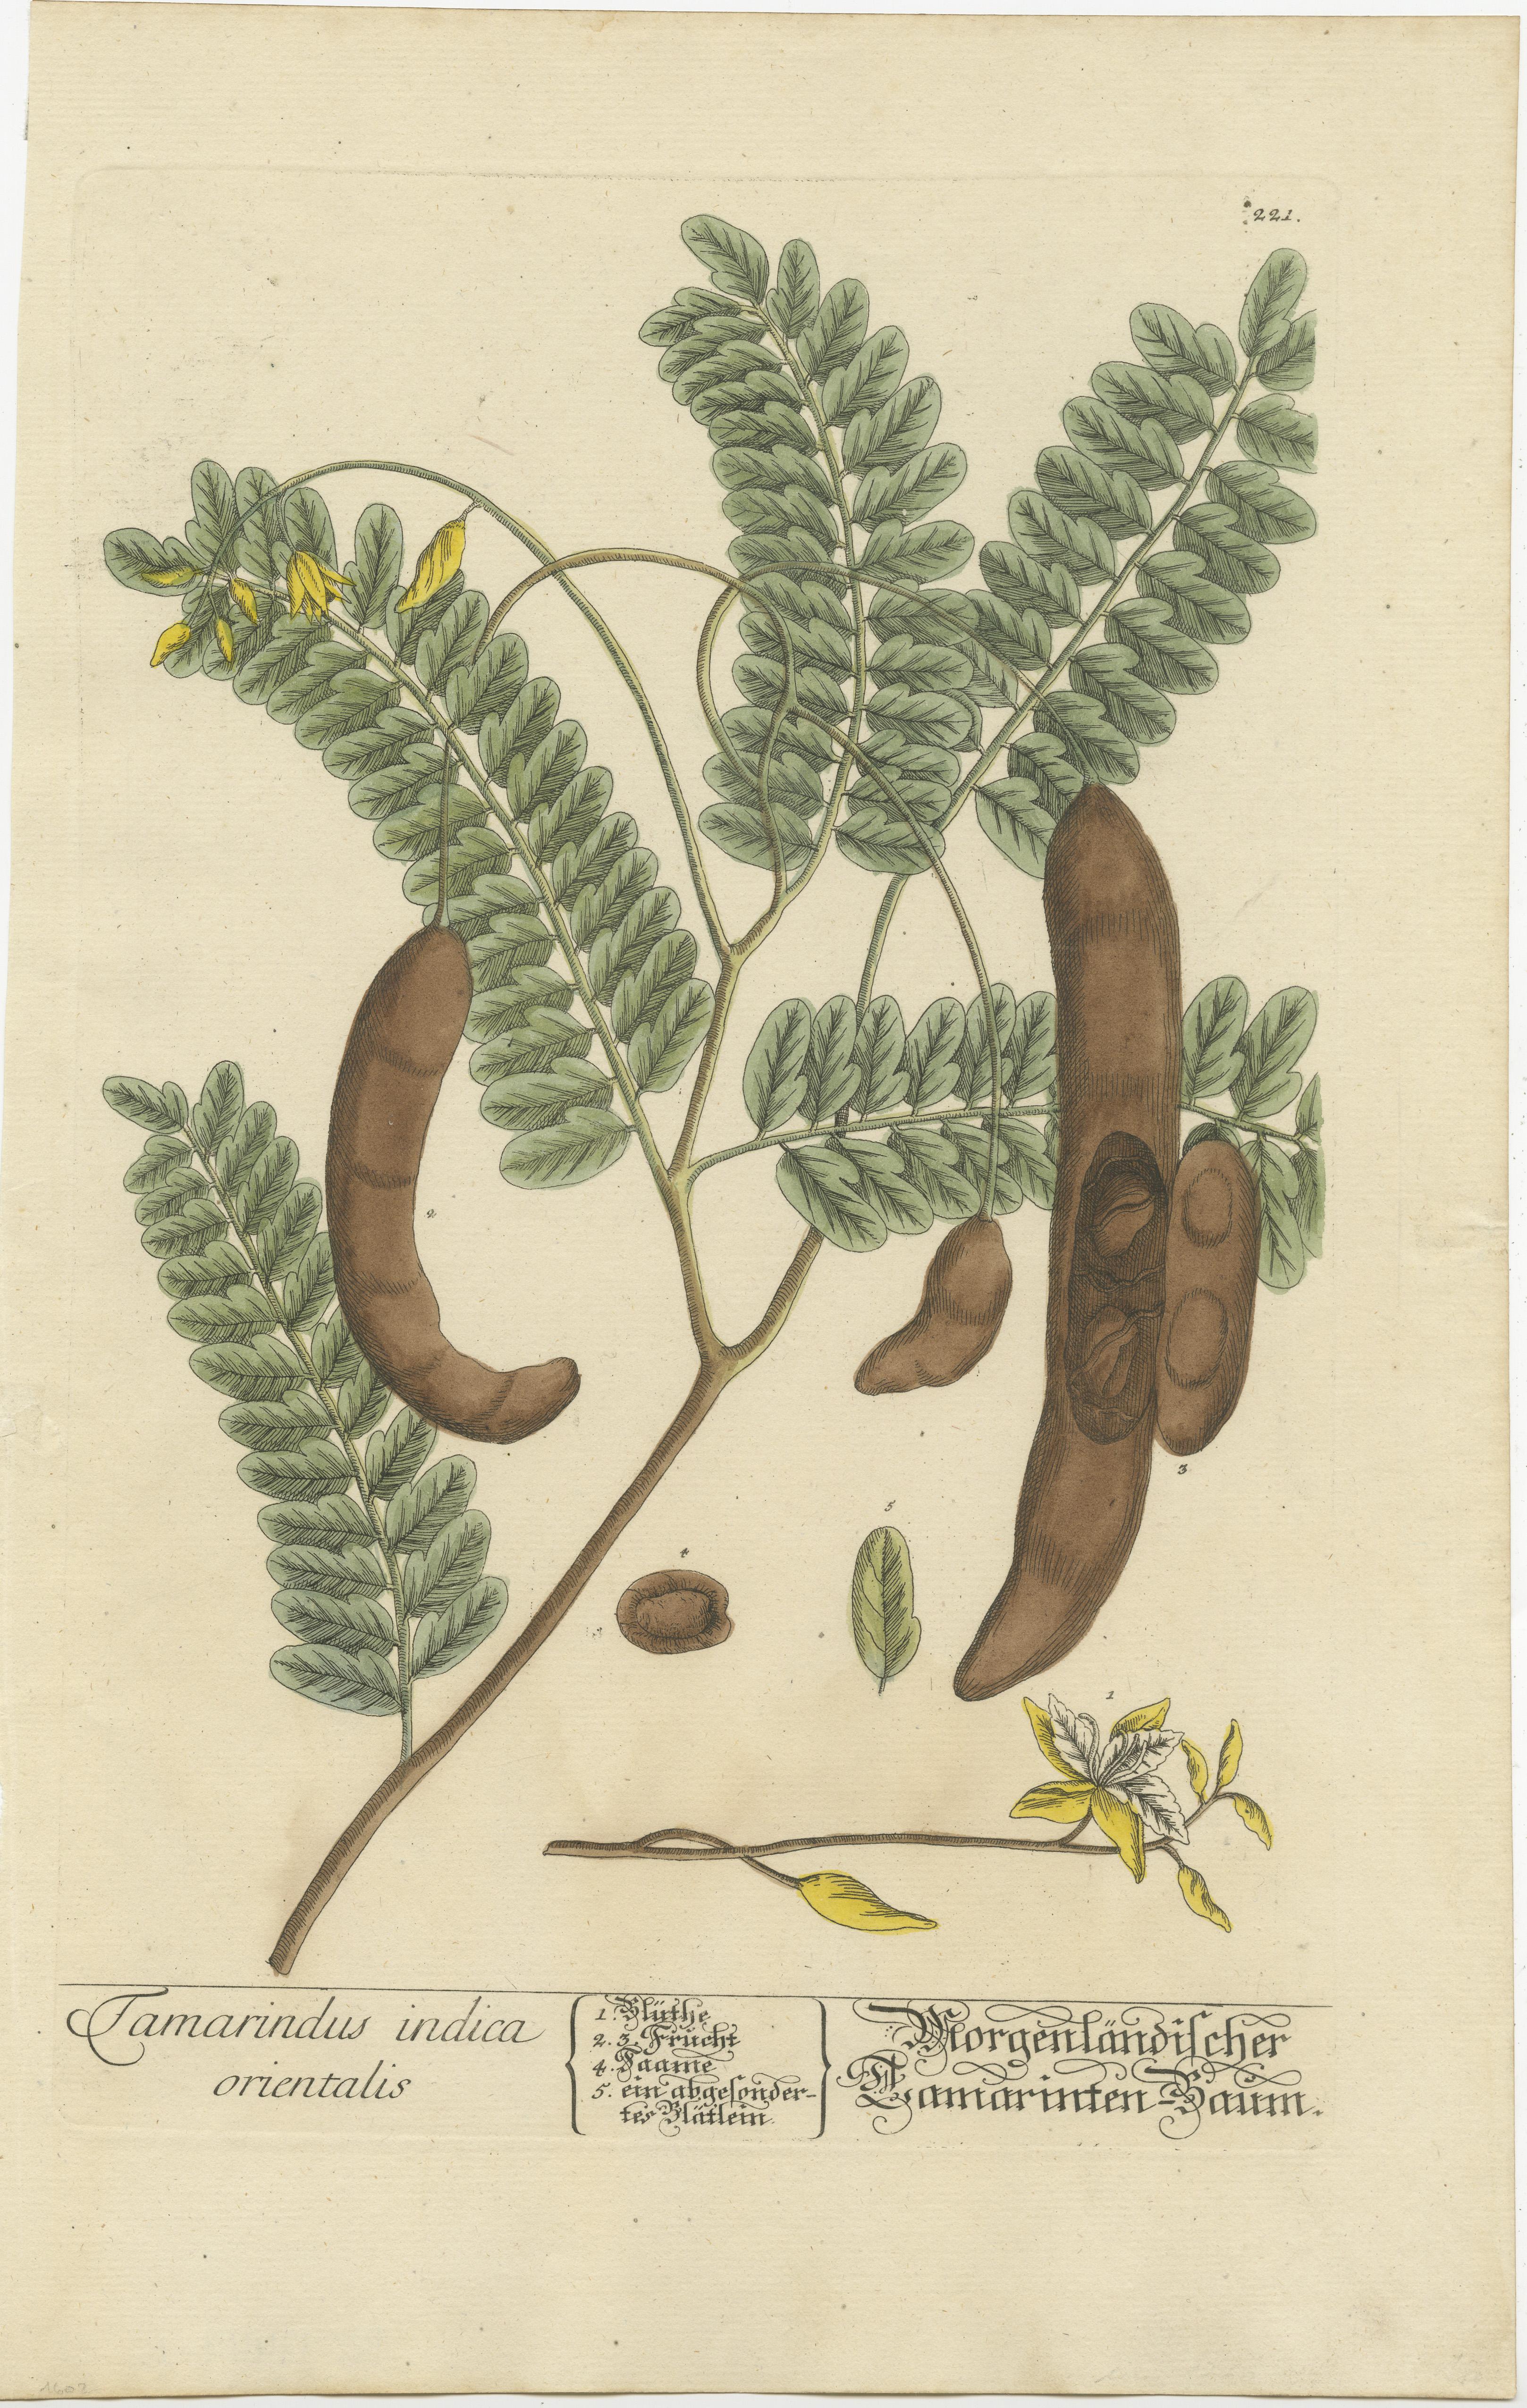 Antique print titled 'Tamarindus indica orientalis'. Botanical print of tamarind, a leguminous tree bearing edible fruit that is indigenous to tropical Africa and naturalized in Asia. Published by or after Elisabeth Blackwell, circa 1750. 